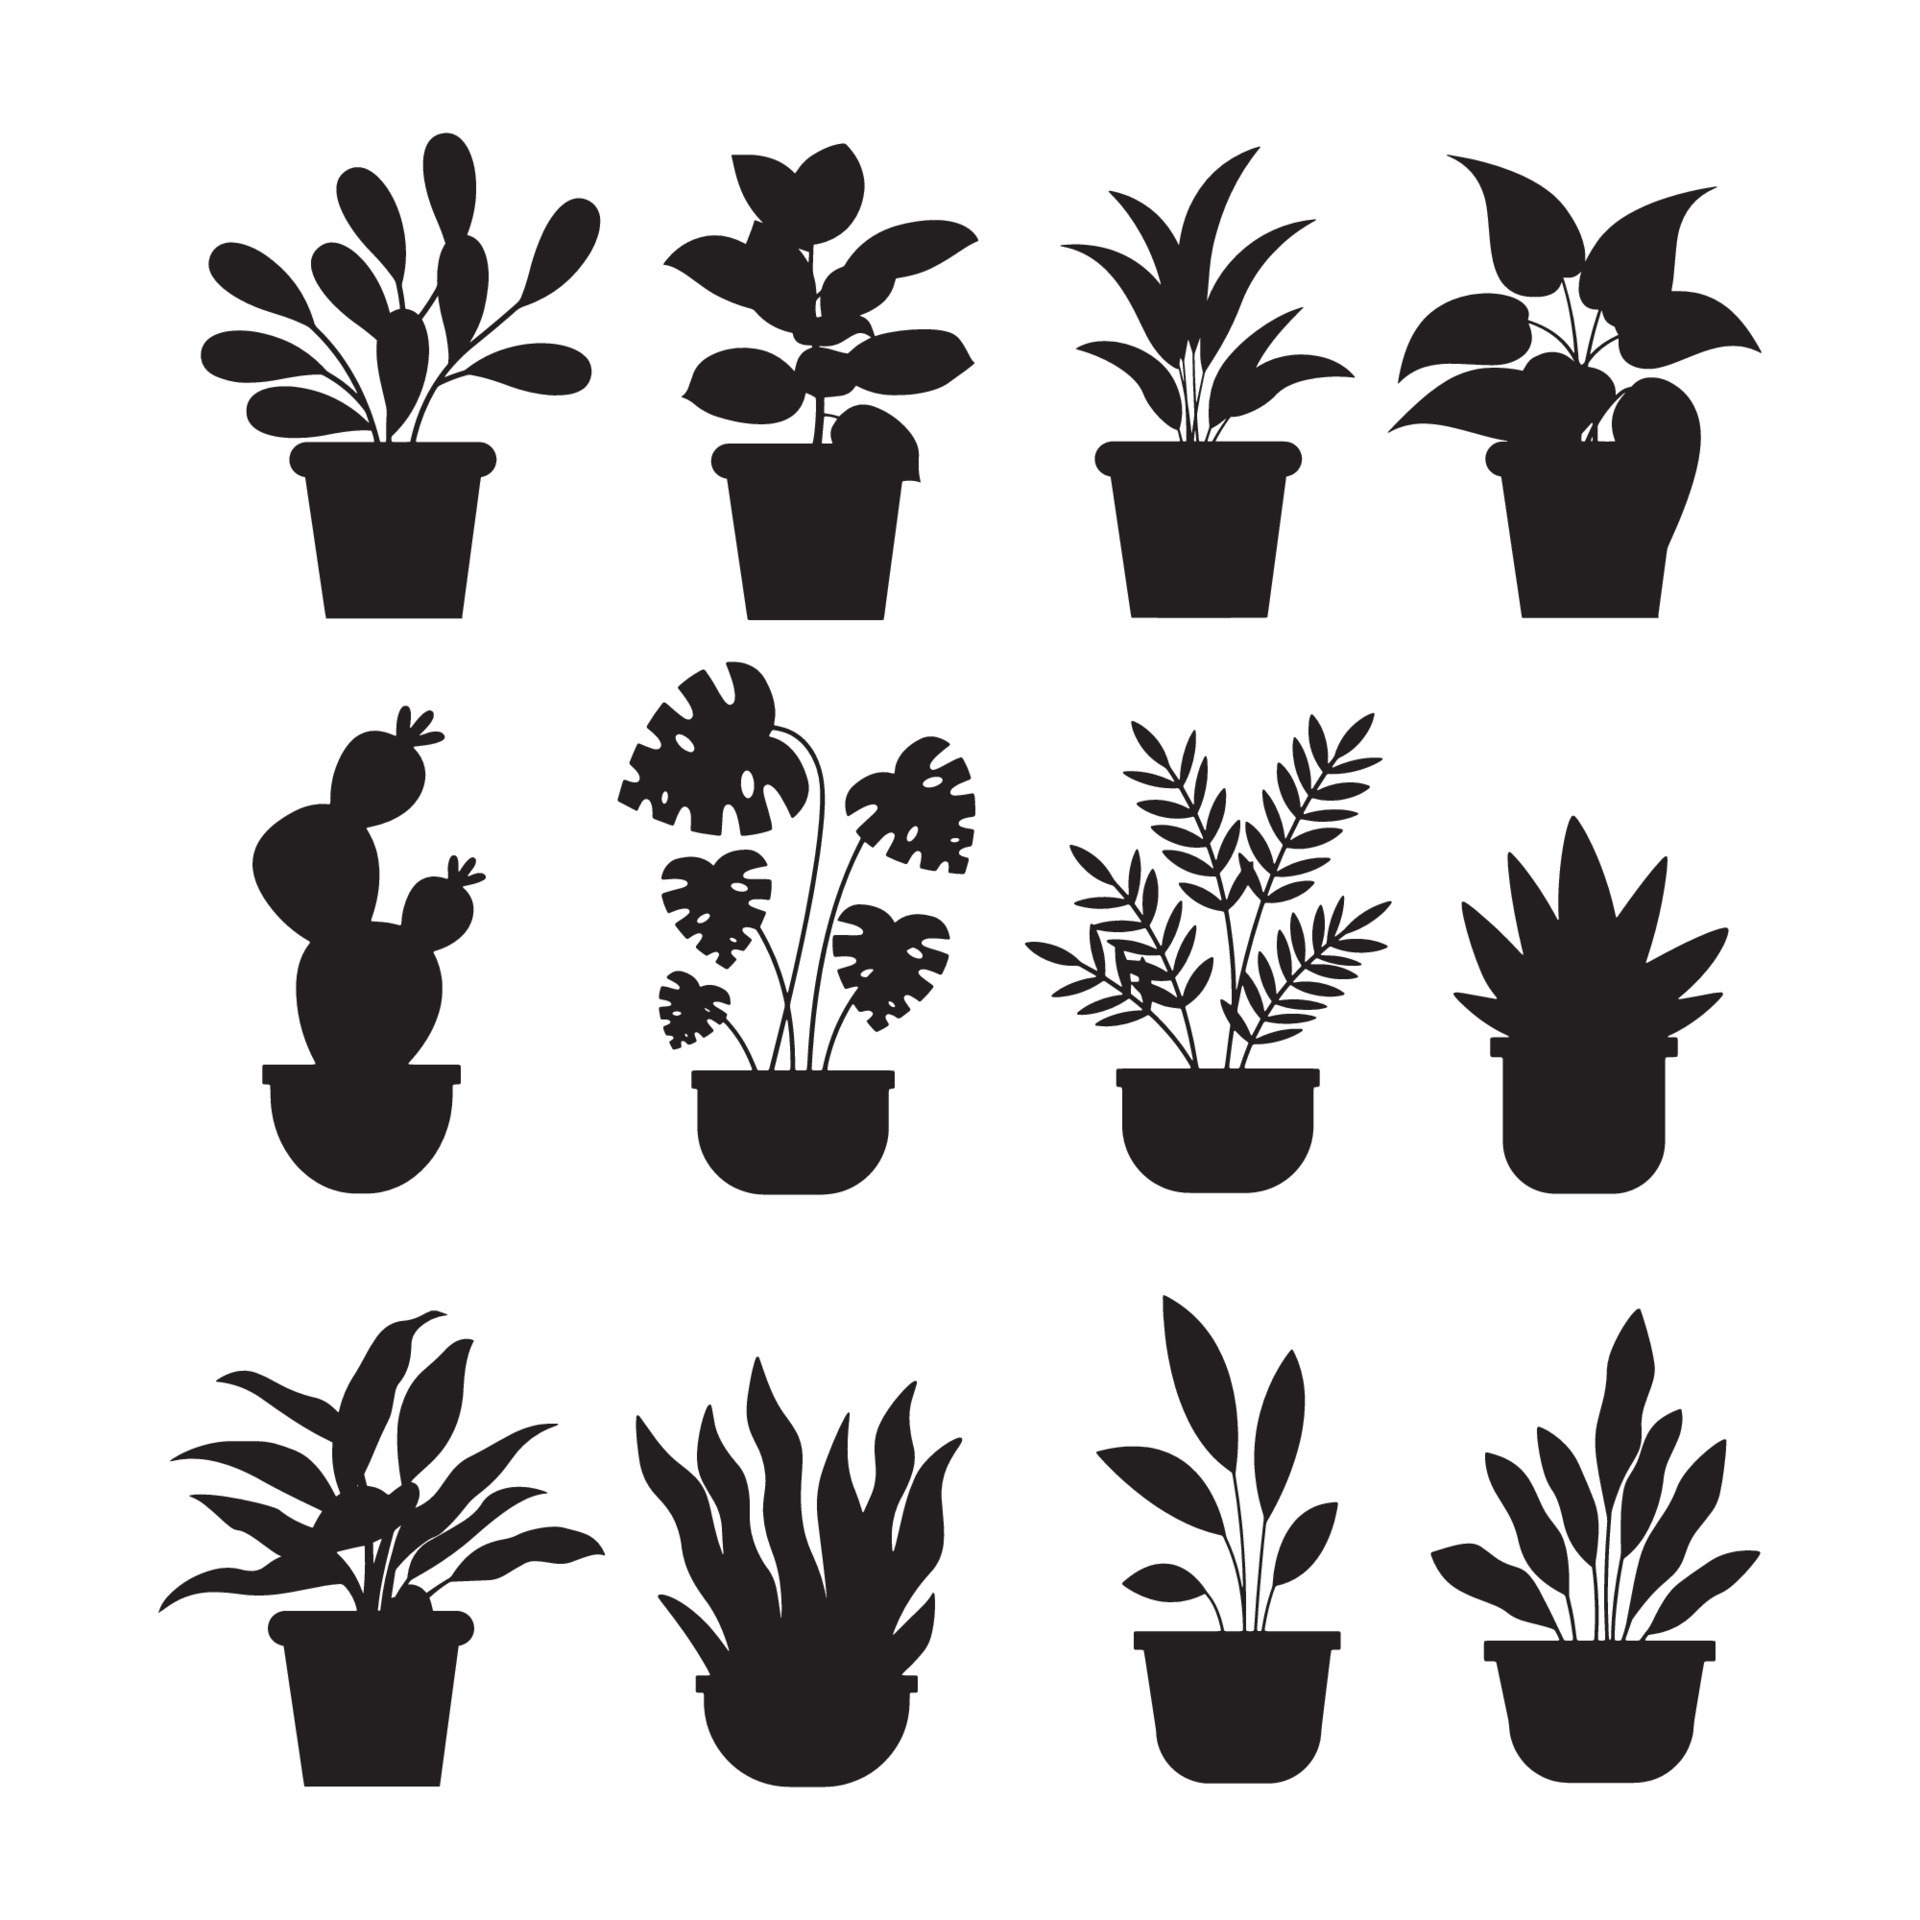 Plant Silhouette Vector Art, Icons, for Download